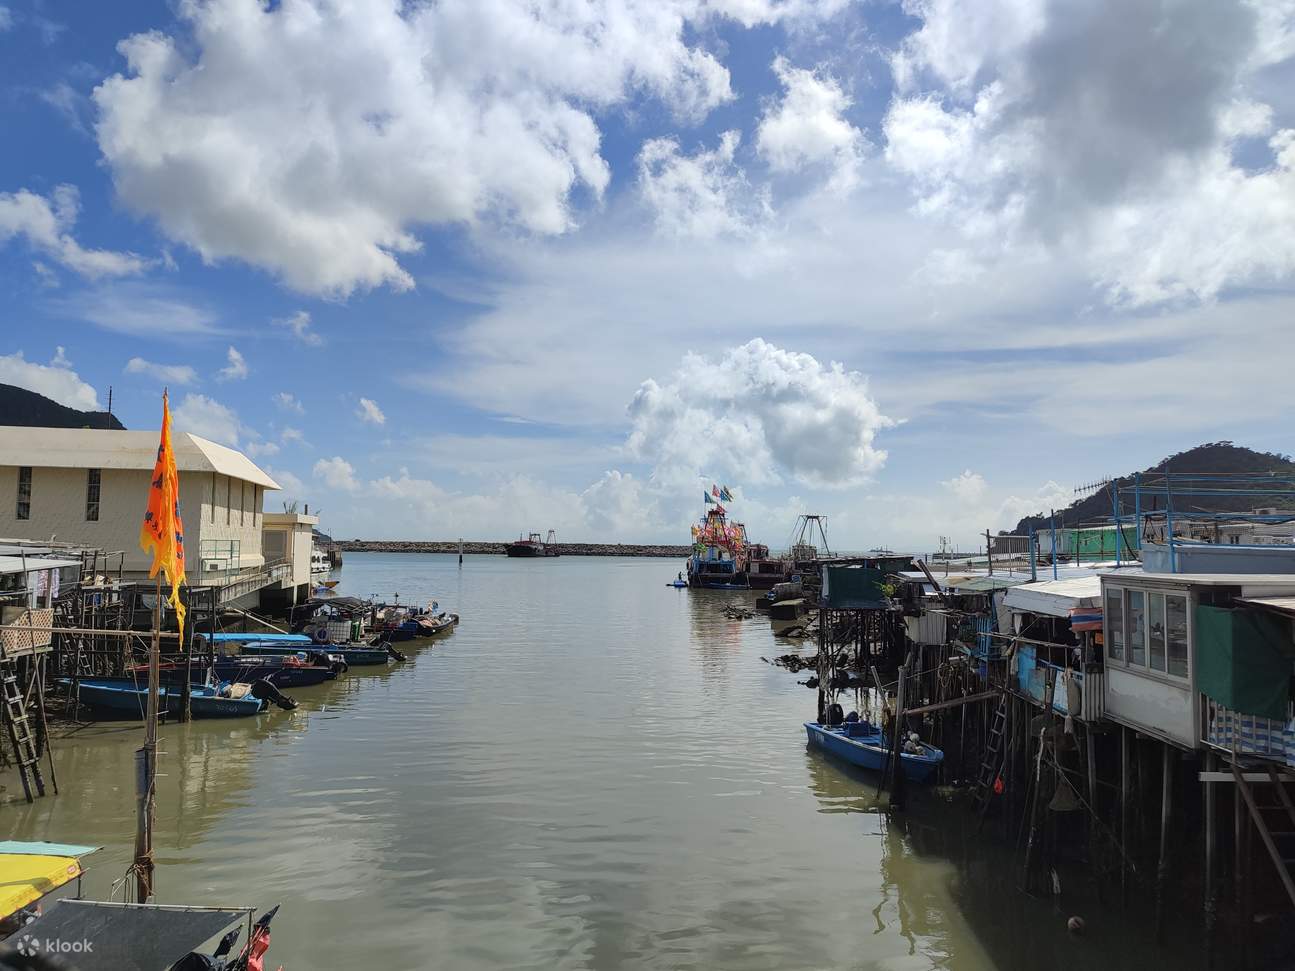 New Route for Hong Kong Water Taxi - Direct Return Ferry from Central to Tai O